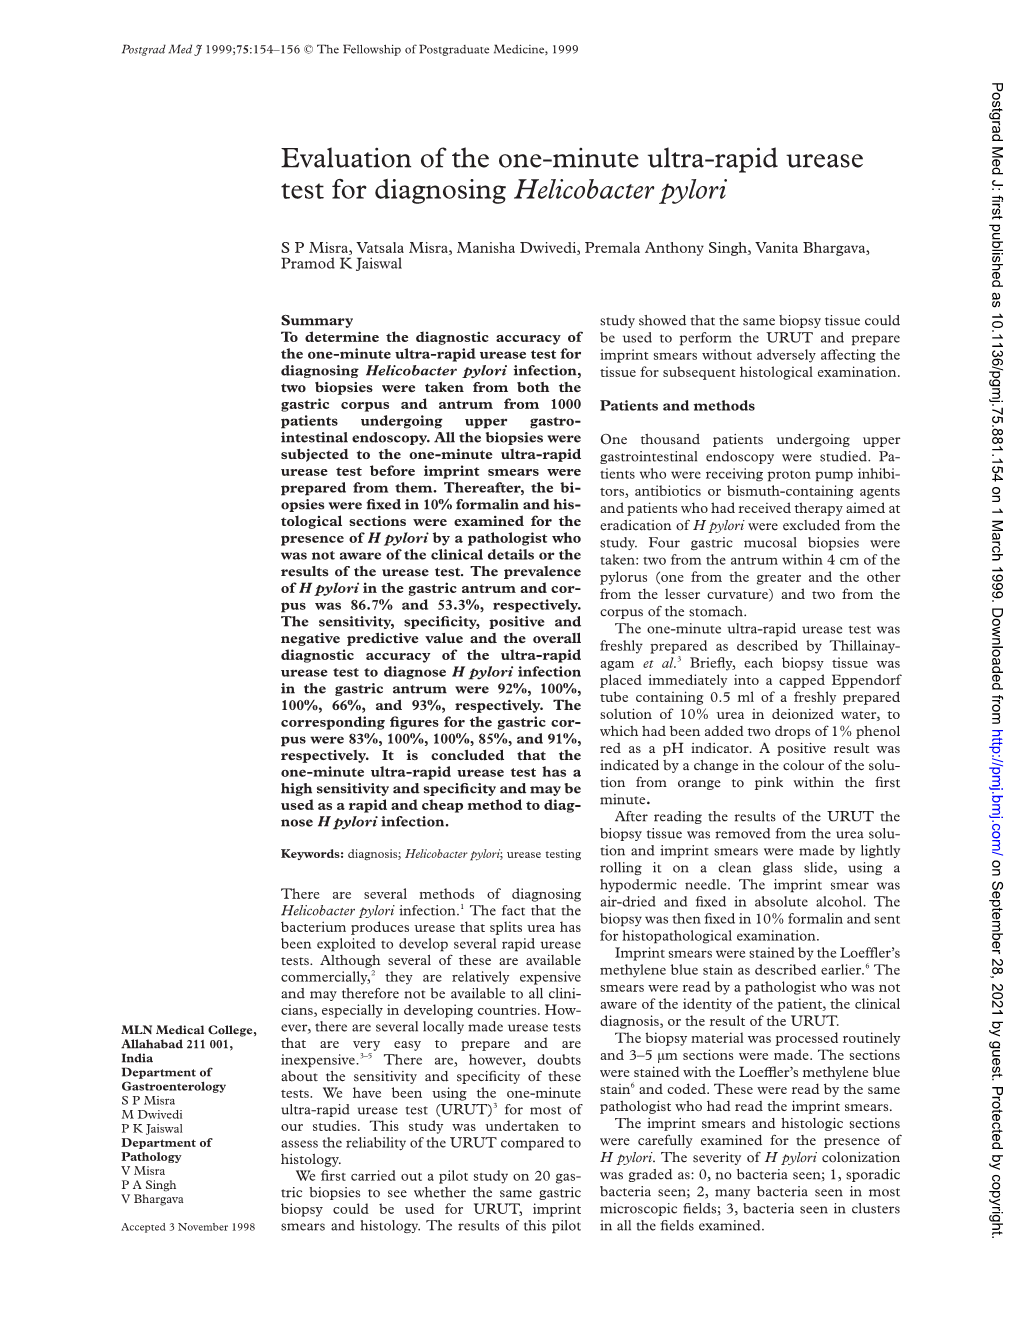 Evaluation of the One-Minute Ultra-Rapid Urease Test for Diagnosing Helicobacter Pylori